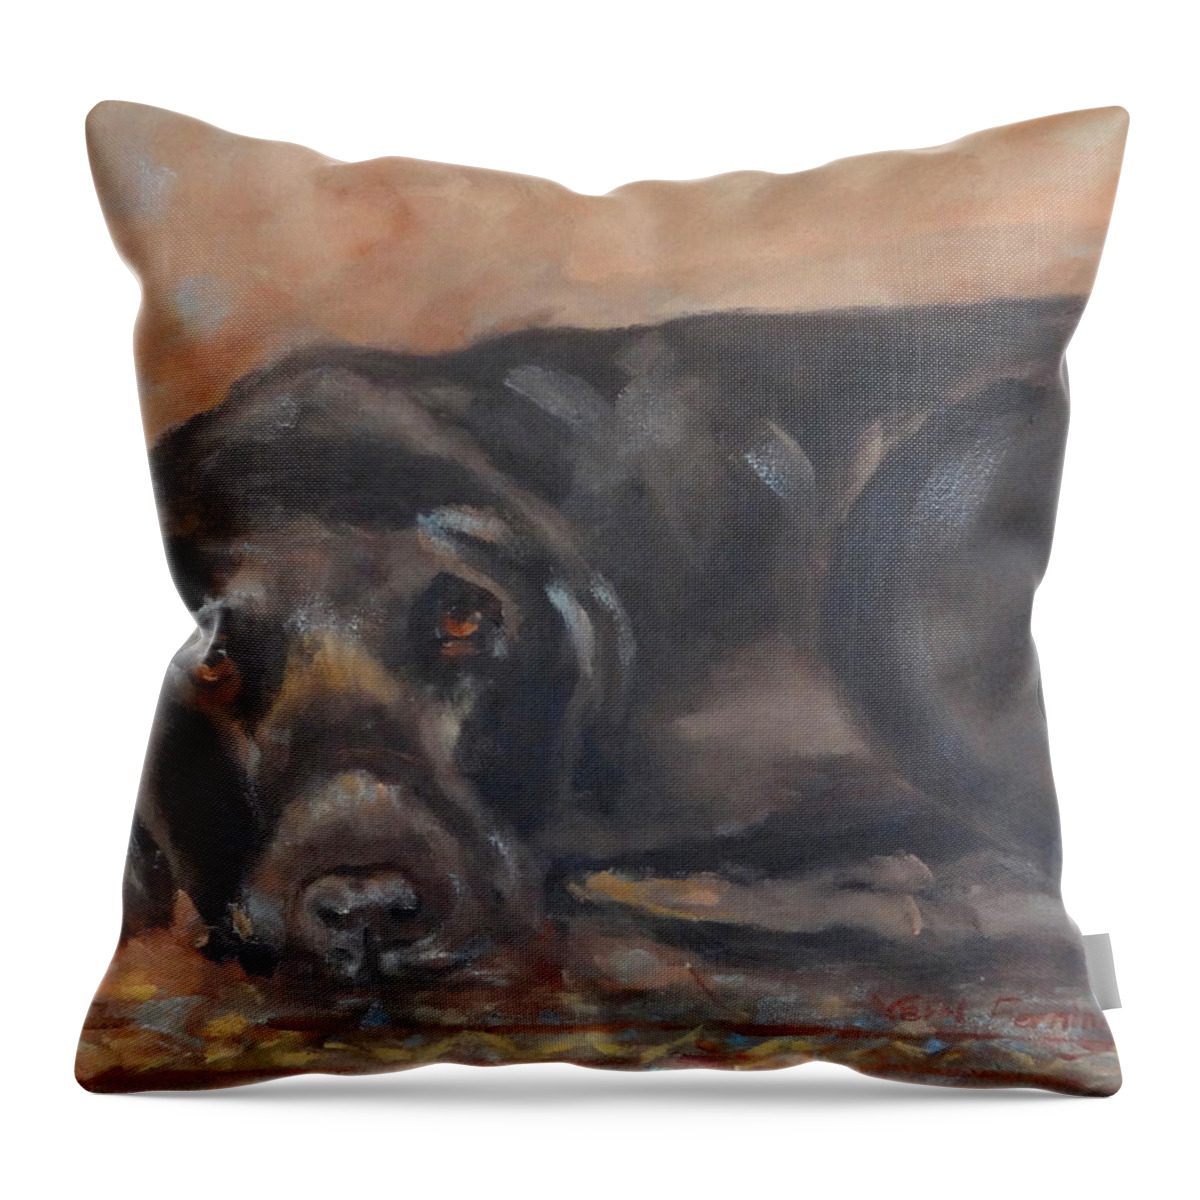 Dark Chocolate Throw Pillow featuring the painting Bruce by Carol Berning